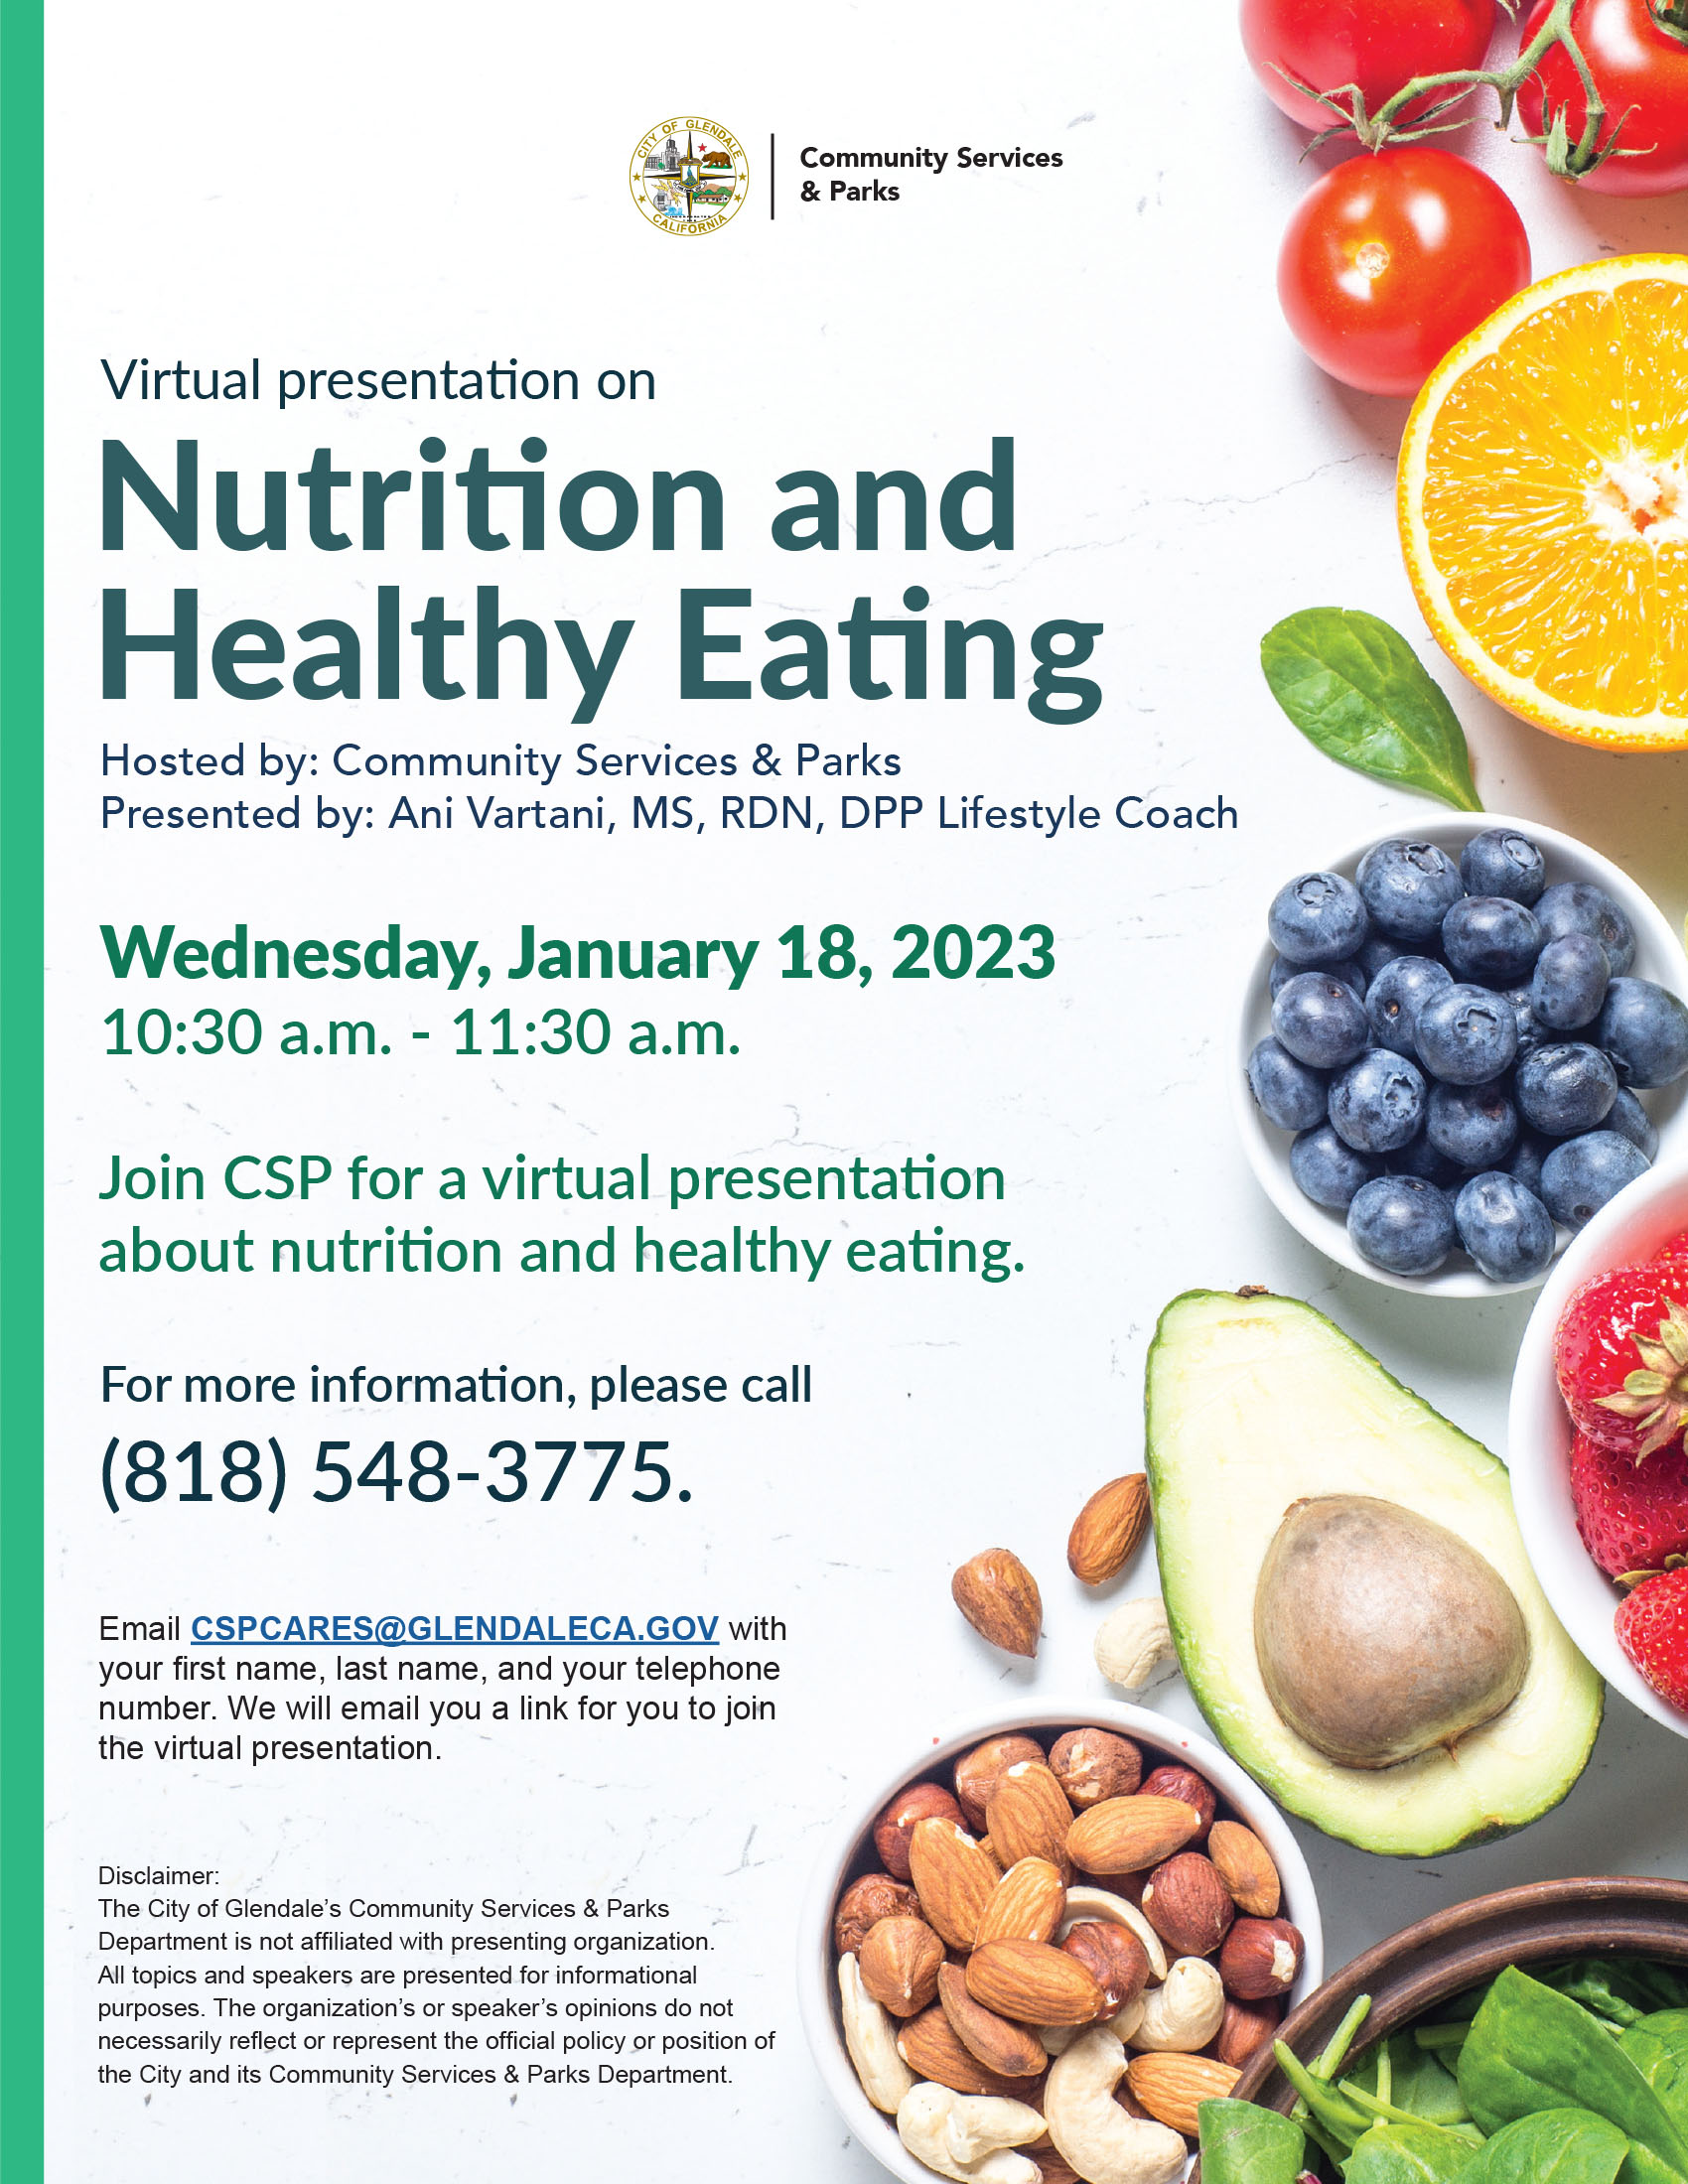 Nutrition and Health Eating flyer 2022 FINAL